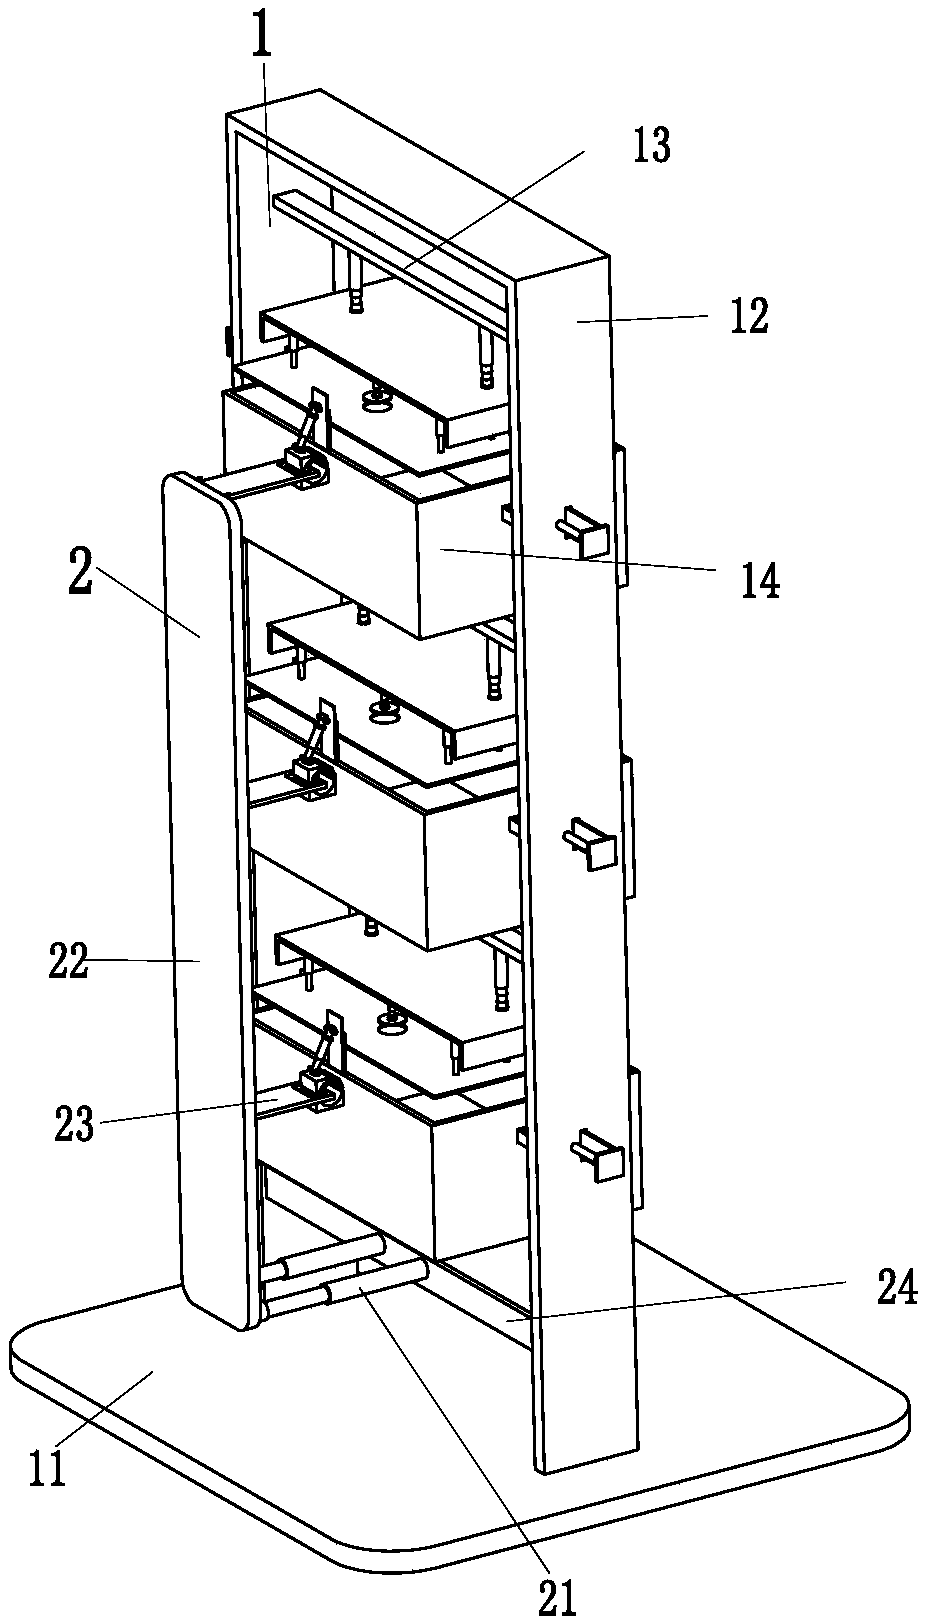 Extruded food manufacturing and processing equipment, as well as extruded food manufacturing and processing method